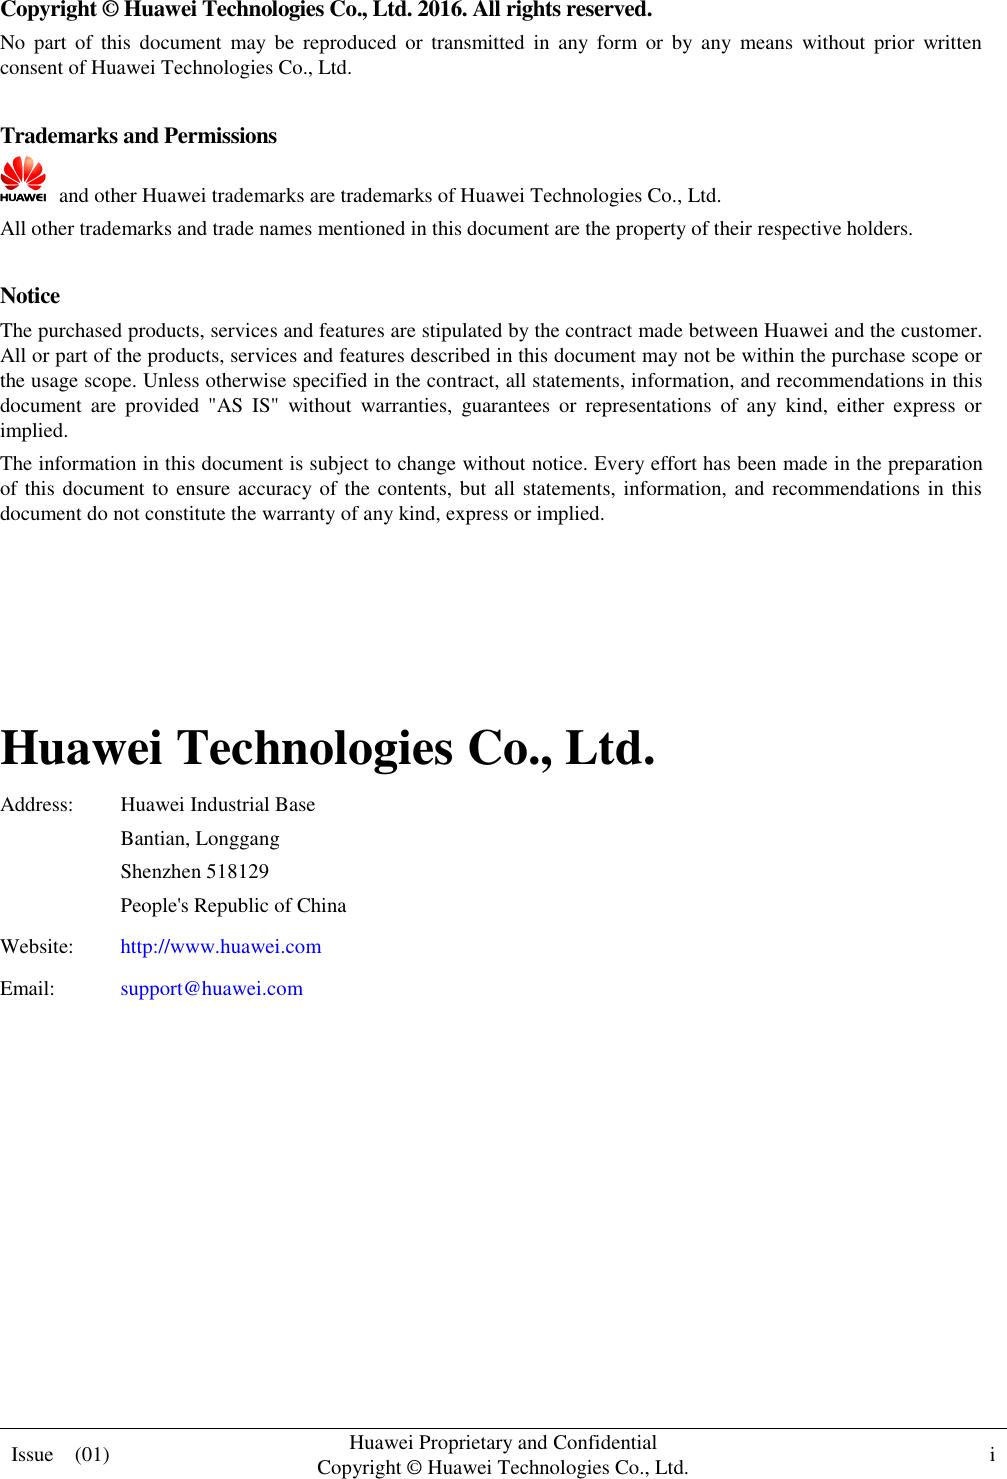  Issue    (01) Huawei Proprietary and Confidential                                     Copyright © Huawei Technologies Co., Ltd. i    Copyright © Huawei Technologies Co., Ltd. 2016. All rights reserved. No  part  of  this  document  may  be  reproduced  or  transmitted  in  any  form  or  by  any  means  without  prior  written consent of Huawei Technologies Co., Ltd.  Trademarks and Permissions   and other Huawei trademarks are trademarks of Huawei Technologies Co., Ltd. All other trademarks and trade names mentioned in this document are the property of their respective holders.  Notice The purchased products, services and features are stipulated by the contract made between Huawei and the customer. All or part of the products, services and features described in this document may not be within the purchase scope or the usage scope. Unless otherwise specified in the contract, all statements, information, and recommendations in this document  are  provided  &quot;AS  IS&quot;  without  warranties,  guarantees  or  representations  of  any  kind,  either  express  or implied. The information in this document is subject to change without notice. Every effort has been made in the preparation of this document to ensure accuracy of the contents, but all statements, information, and recommendations in this document do not constitute the warranty of any kind, express or implied.     Huawei Technologies Co., Ltd. Address: Huawei Industrial Base Bantian, Longgang Shenzhen 518129 People&apos;s Republic of China Website: http://www.huawei.com Email: support@huawei.com           